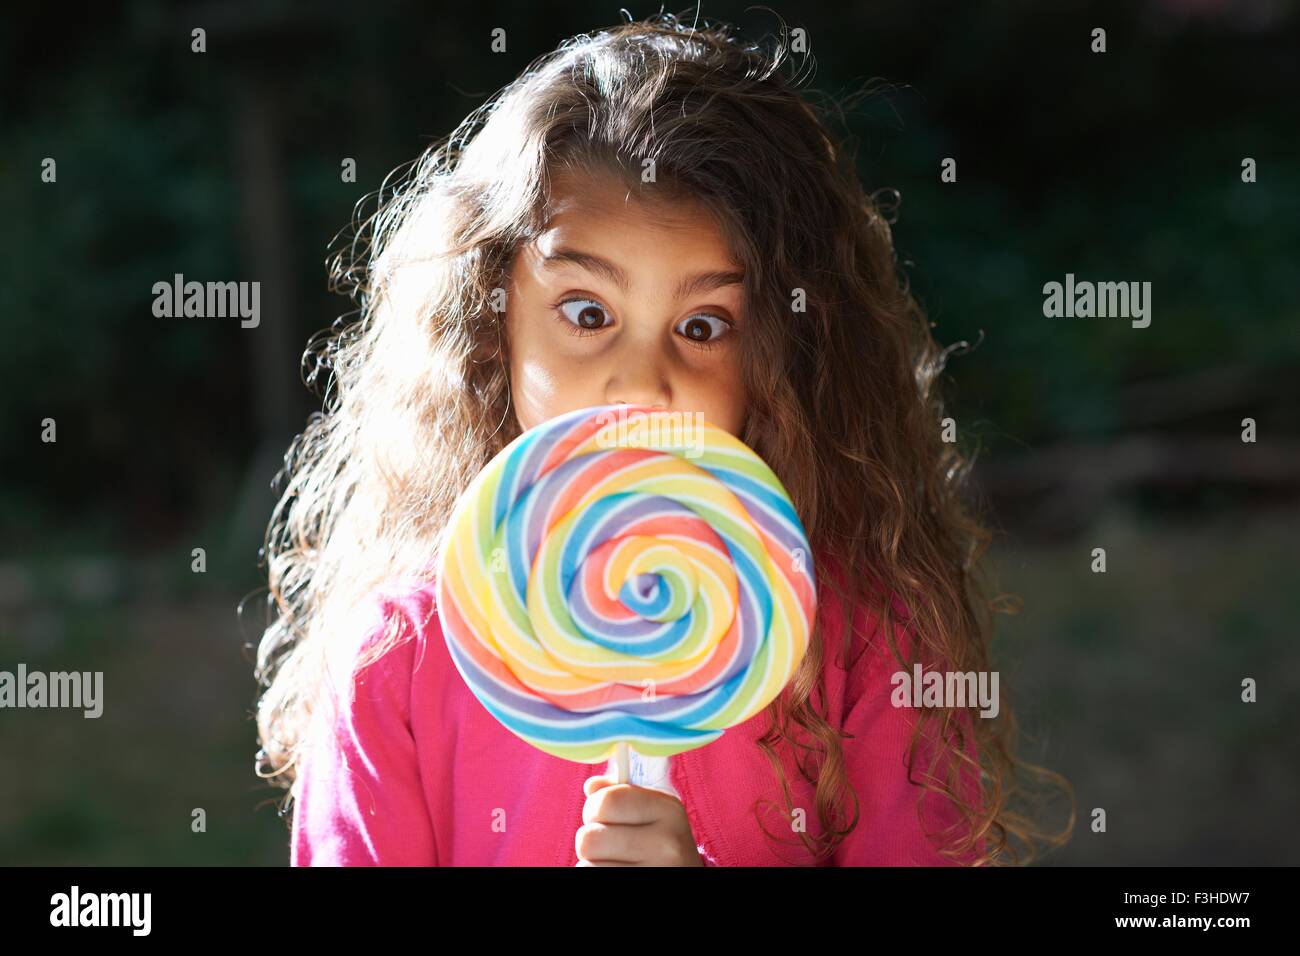 Portrait of girl crossing eyes with lollipop in front of her face in garden Stock Photo